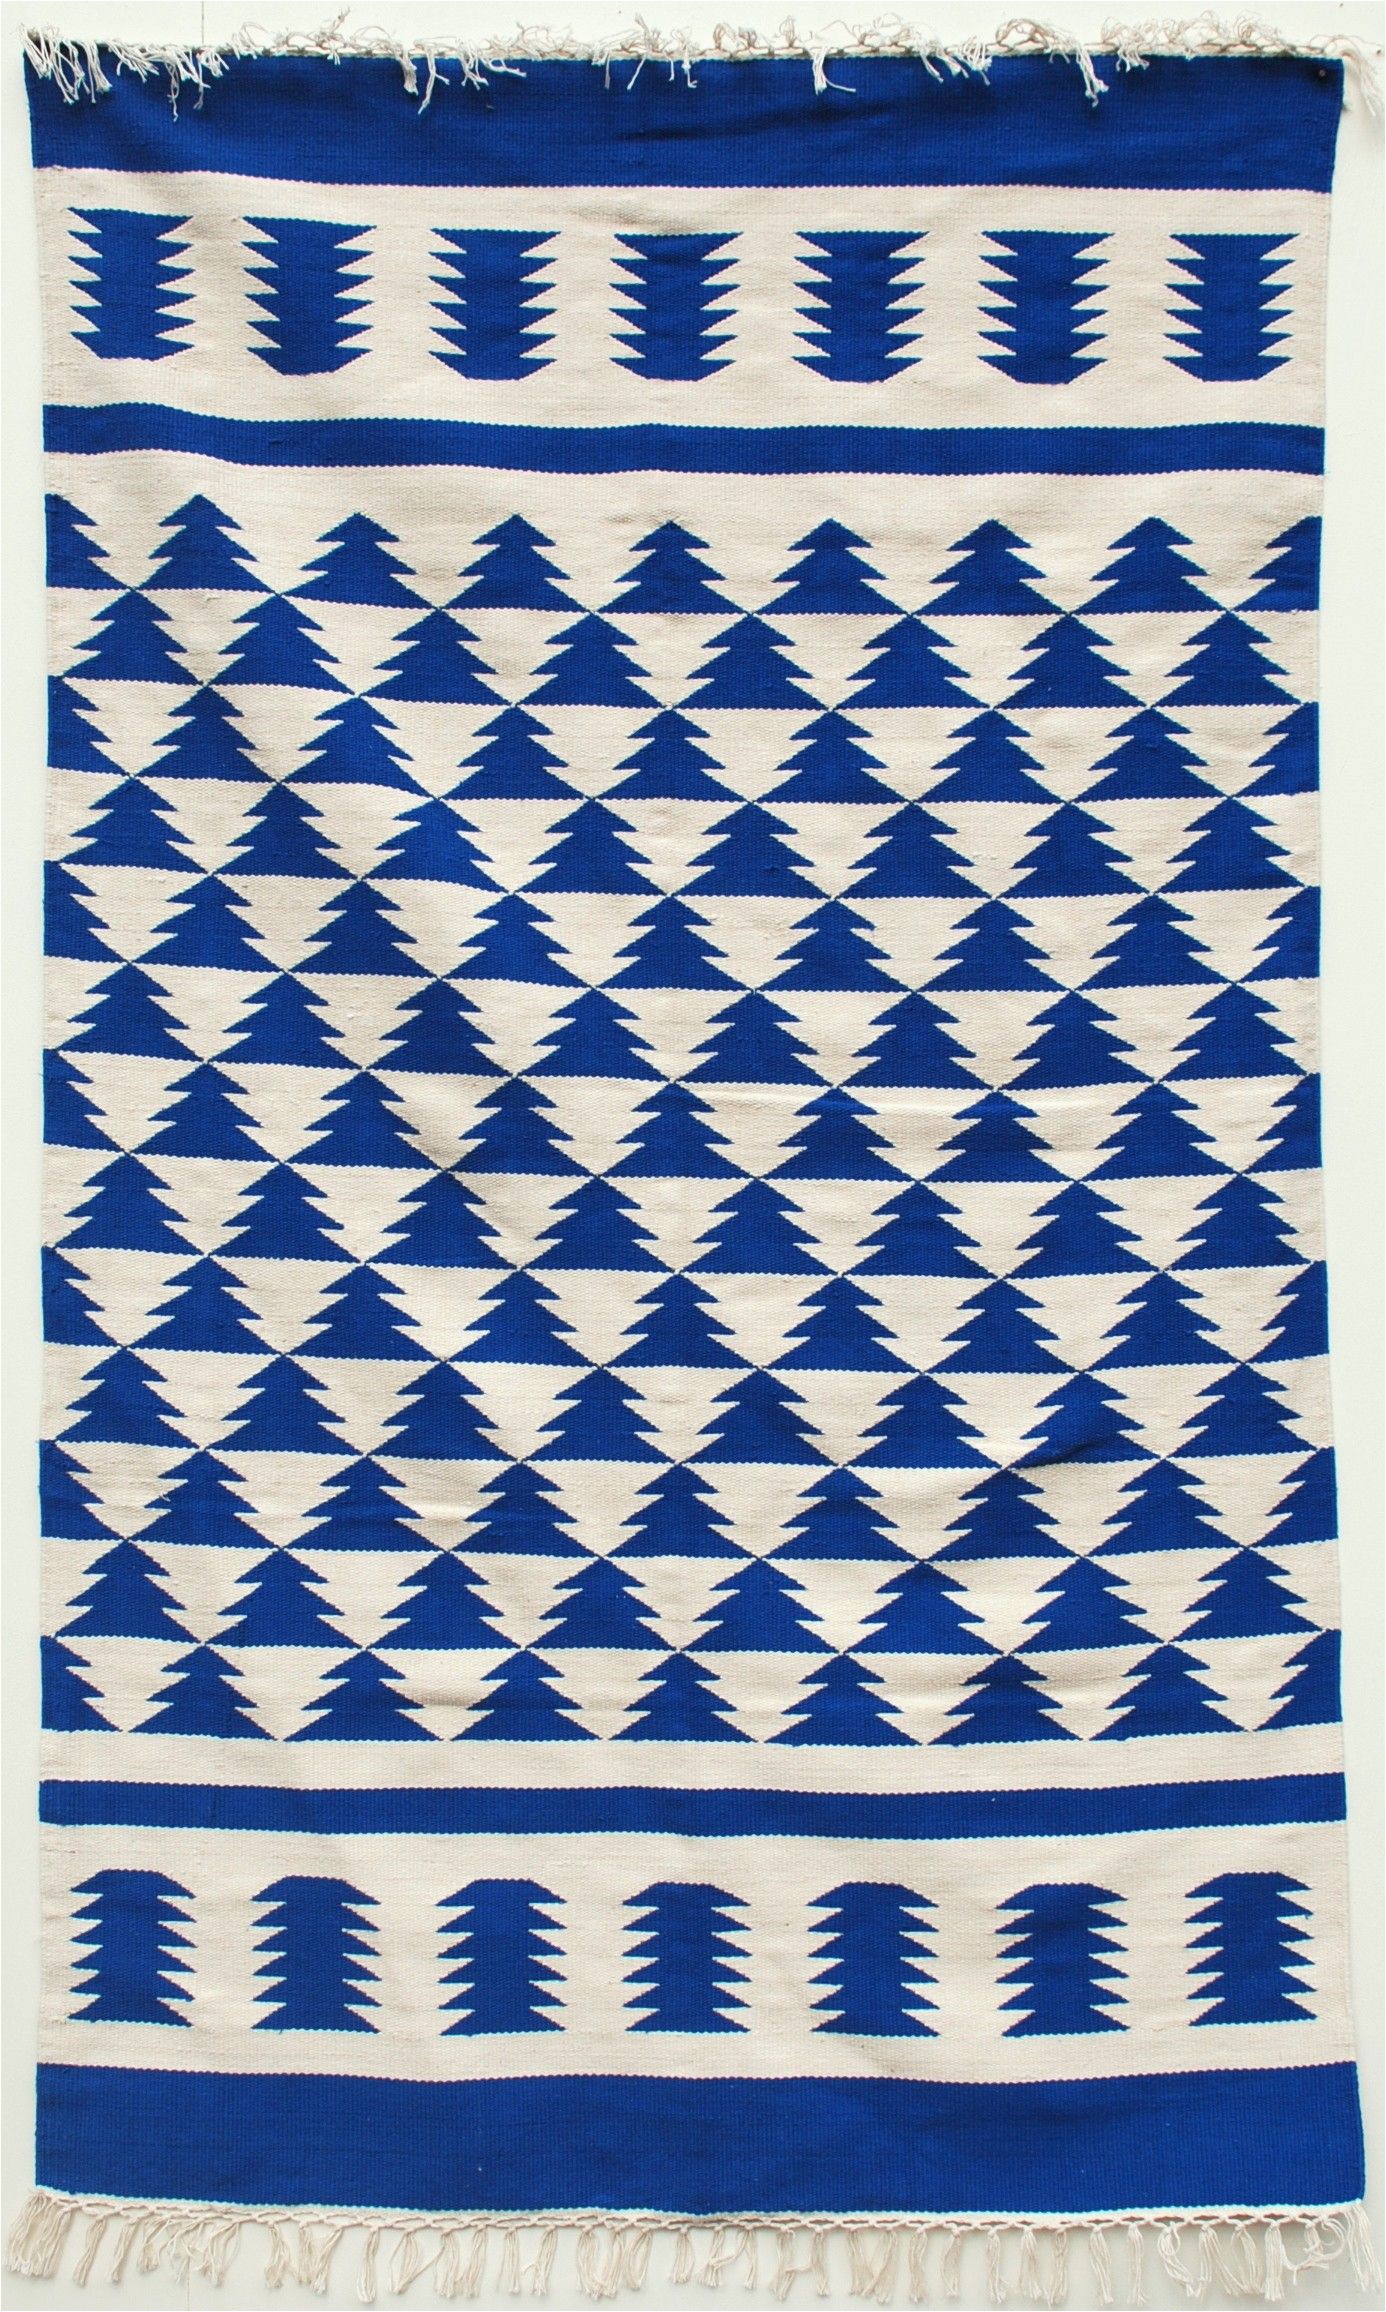 Blue and White Aztec Rug Unique Dhurrie Rugs for Stunning Floor Decoration Ideas